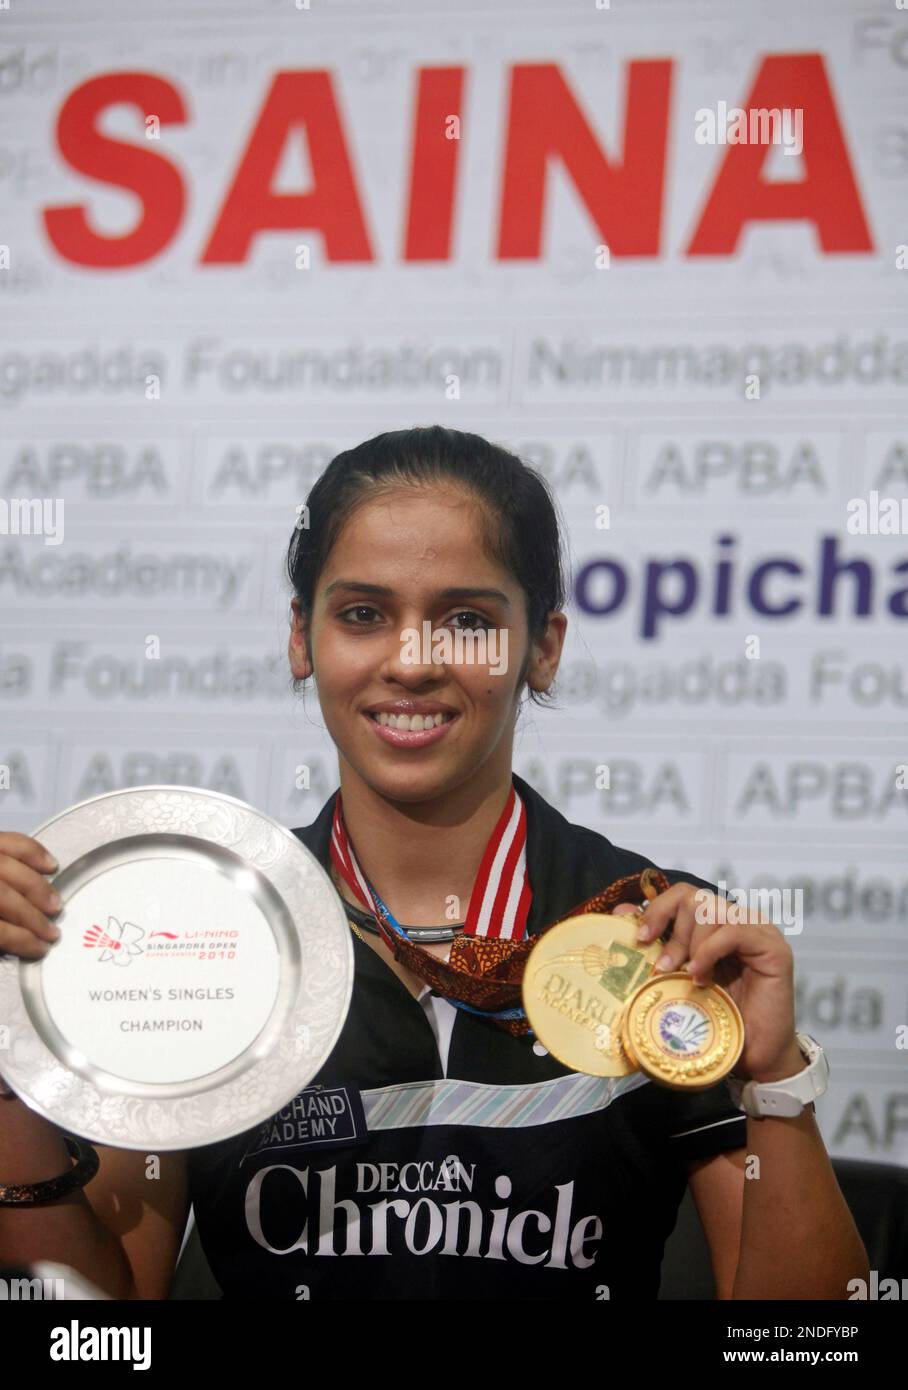 Indian badminton player Saina Nehwal displays her medals during a press conference in Hyderabad, India, Tuesday, June 29, 2010